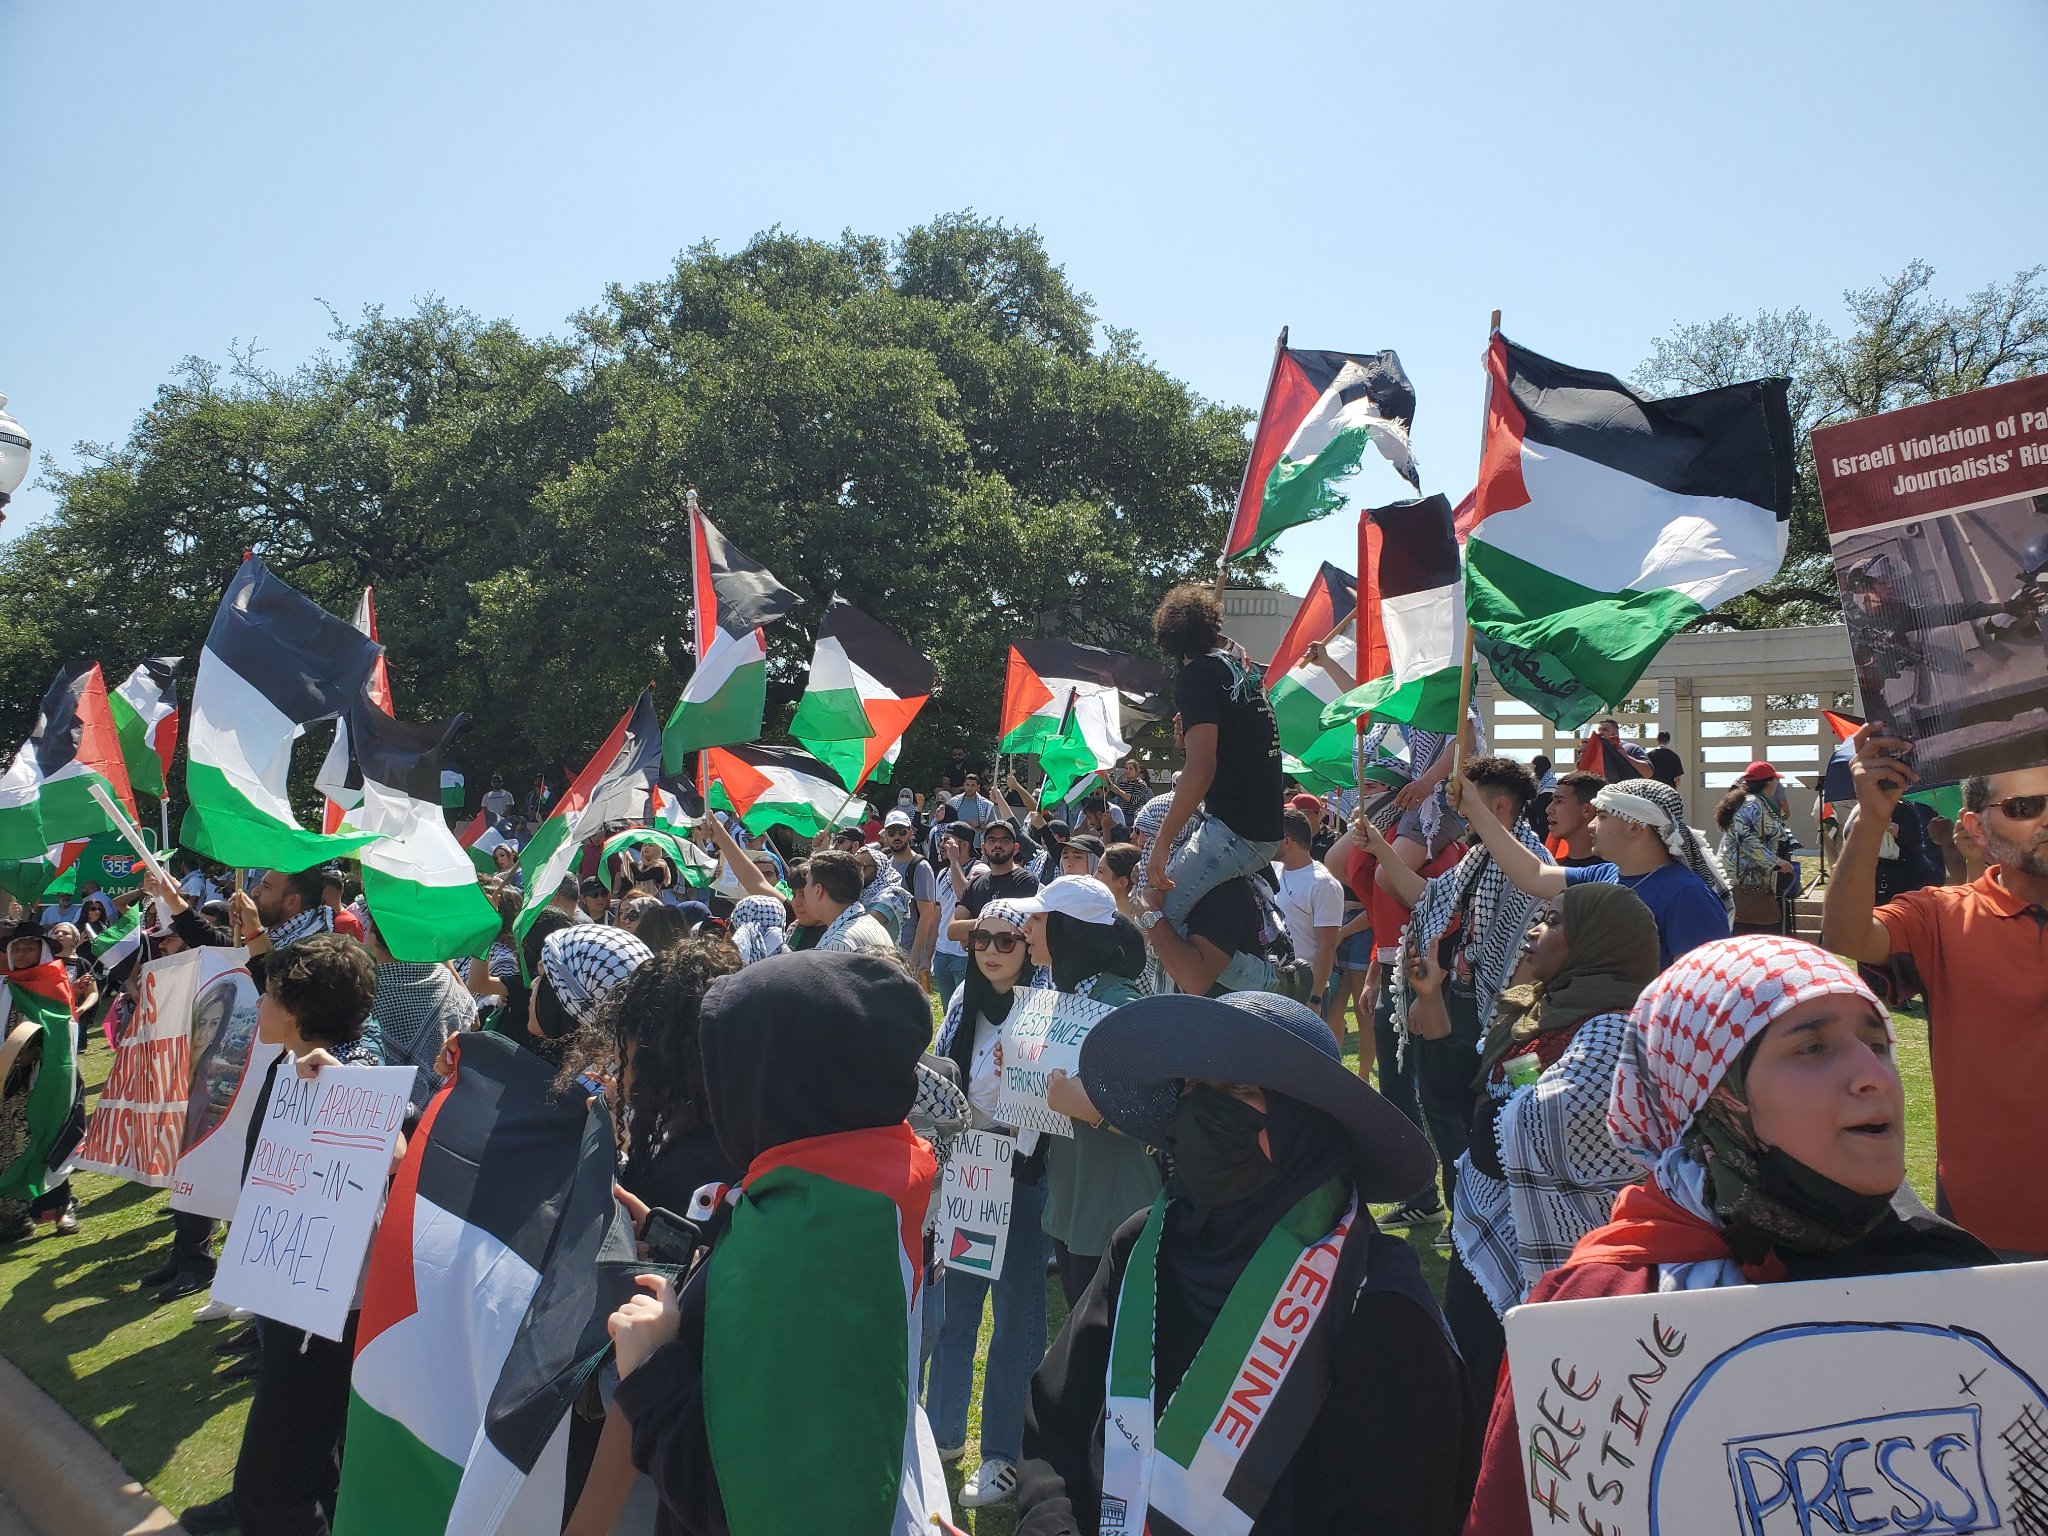 American Muslim Organizations Unite to Reject ADL’s ‘Slander’ and Support Palestinian Human Rights